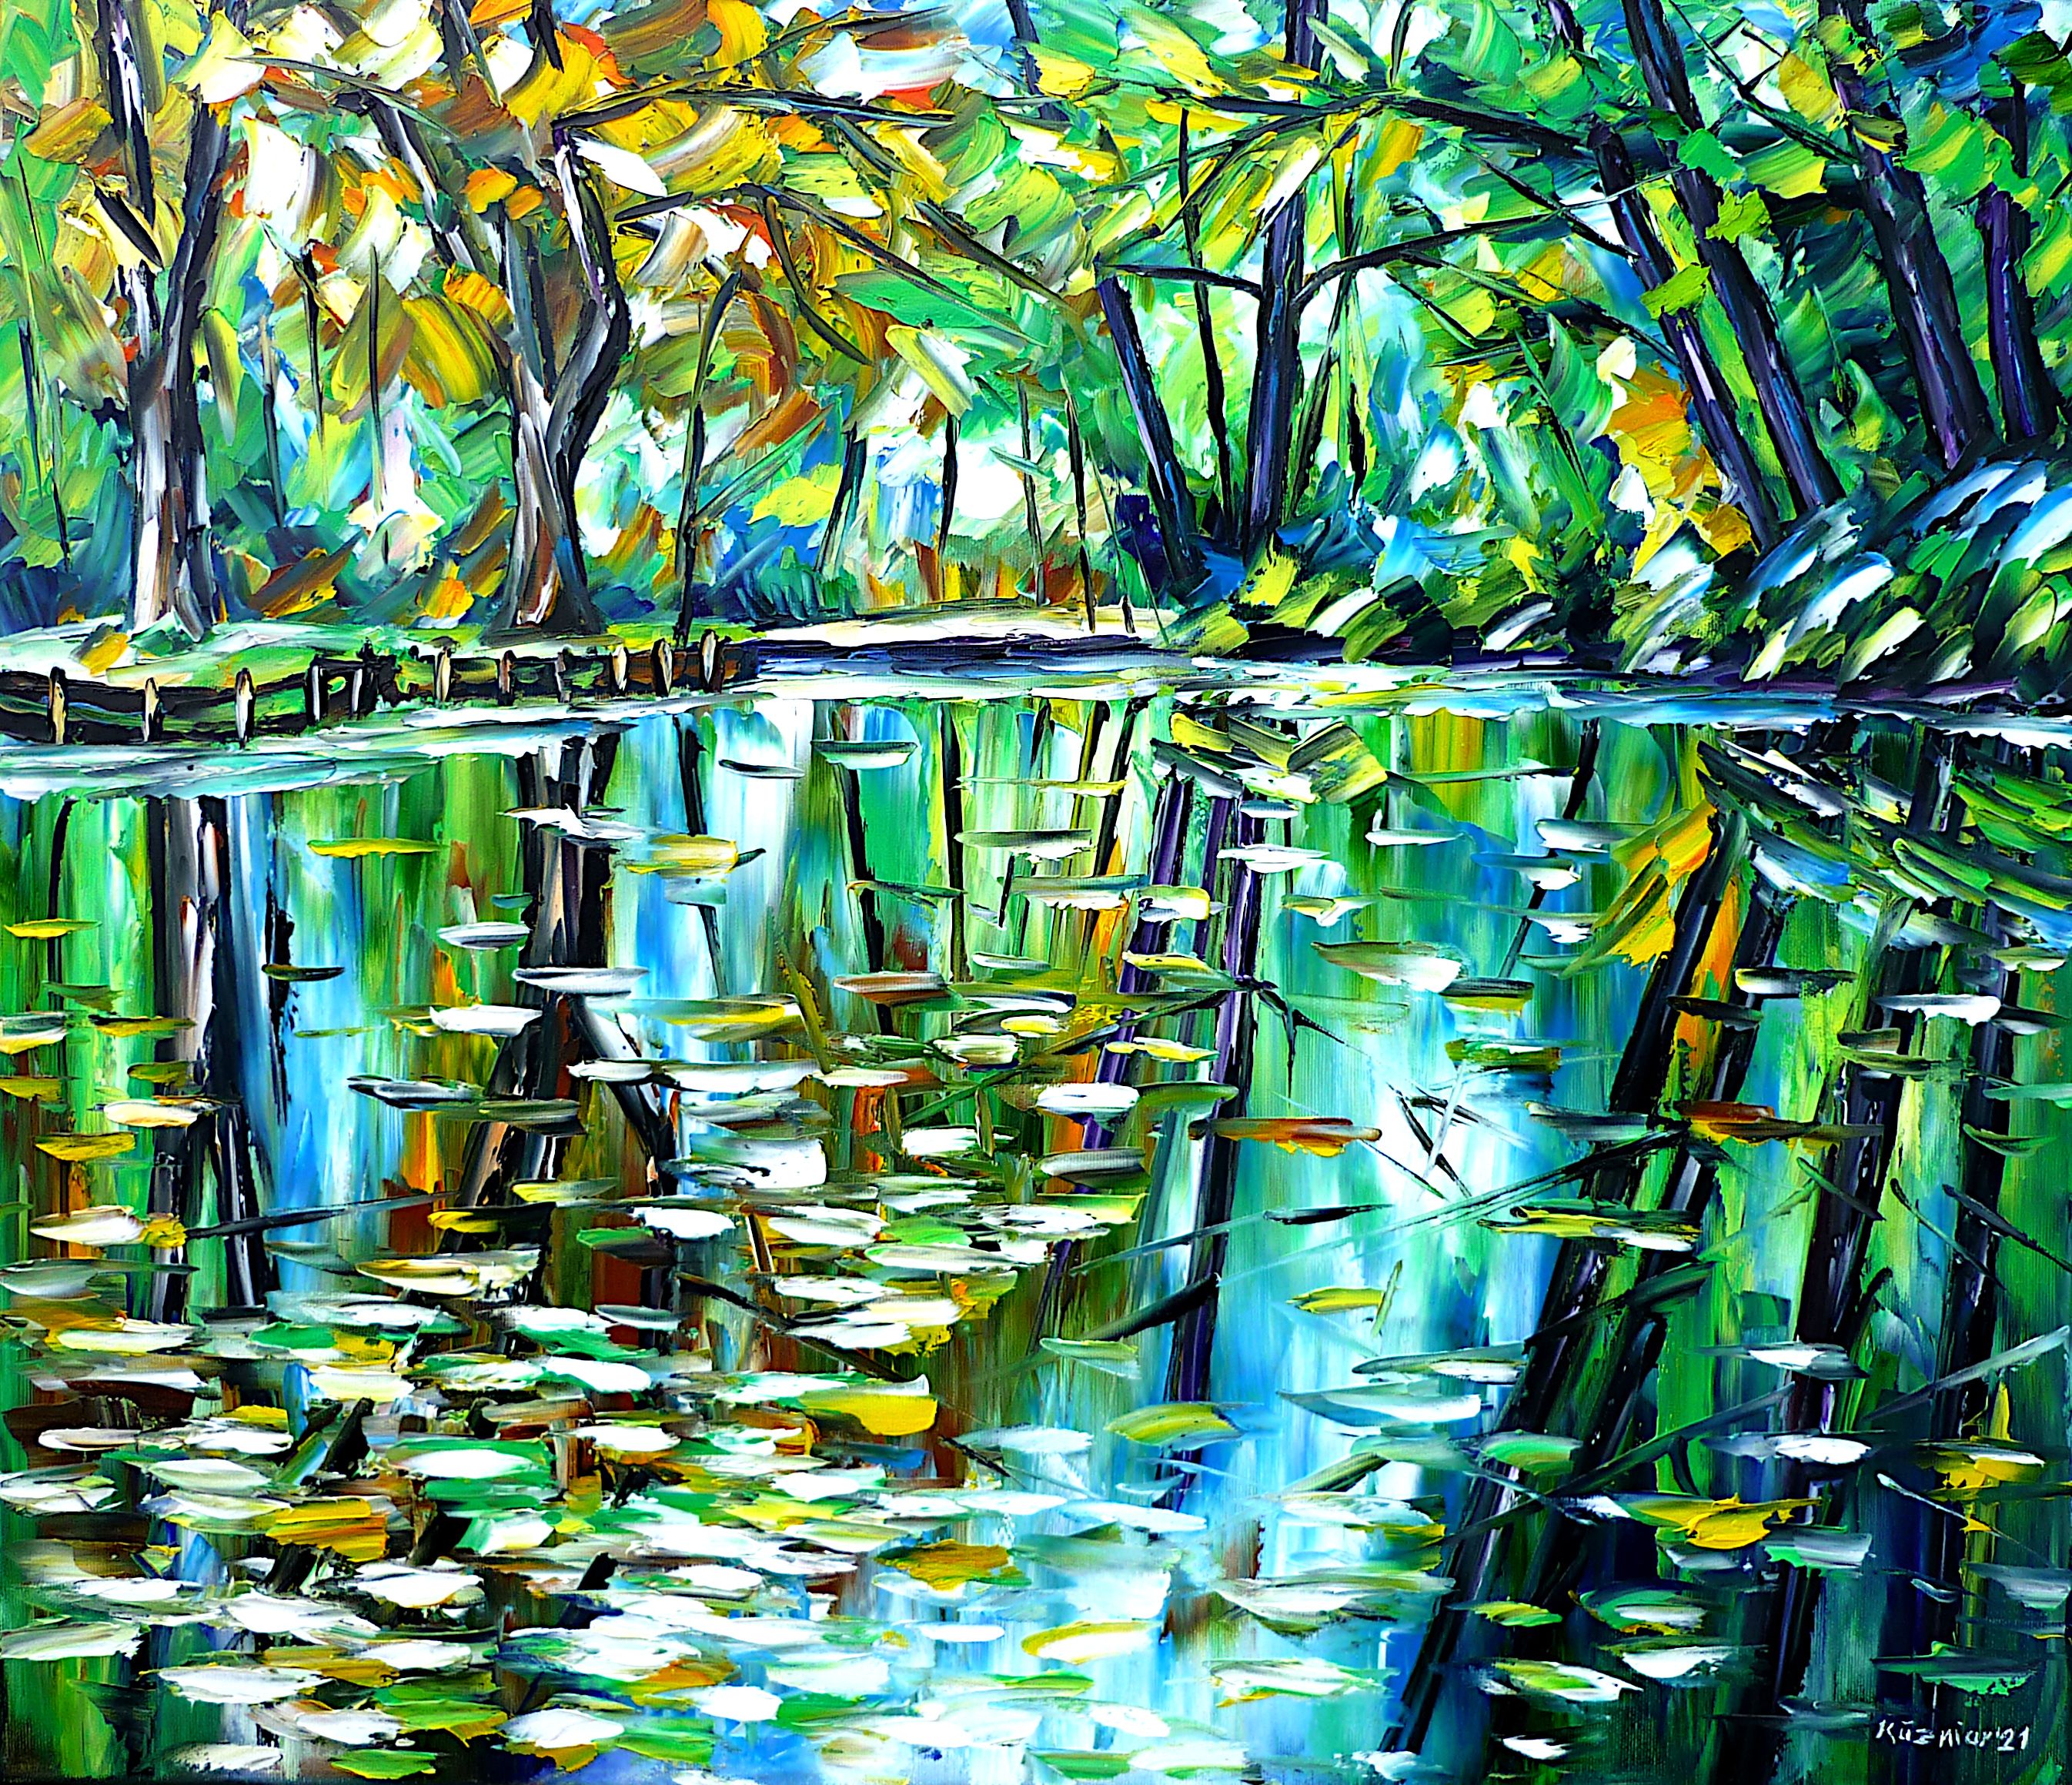 spreewald in autumn,spreewald picture,spreewald painting,spreewald landscape,spreewald river landscape,autumn leaves,beautiful spreewald,brandenburg,east germany,beautiful germany,german landscape,beautiful nature,peaceful nature,spreewalds rivers,water reflections,green landscape,green nature,late summer,autumn beginning,spreewald river channels,summer and autumn,leaves on the water,spreewald love,pure nature,green colors,green painting,palette knife oil painting,modern art,impressionism,abstract painting,lively colours,colorful painting,bright colors,light reflections,impasto painting,figurative